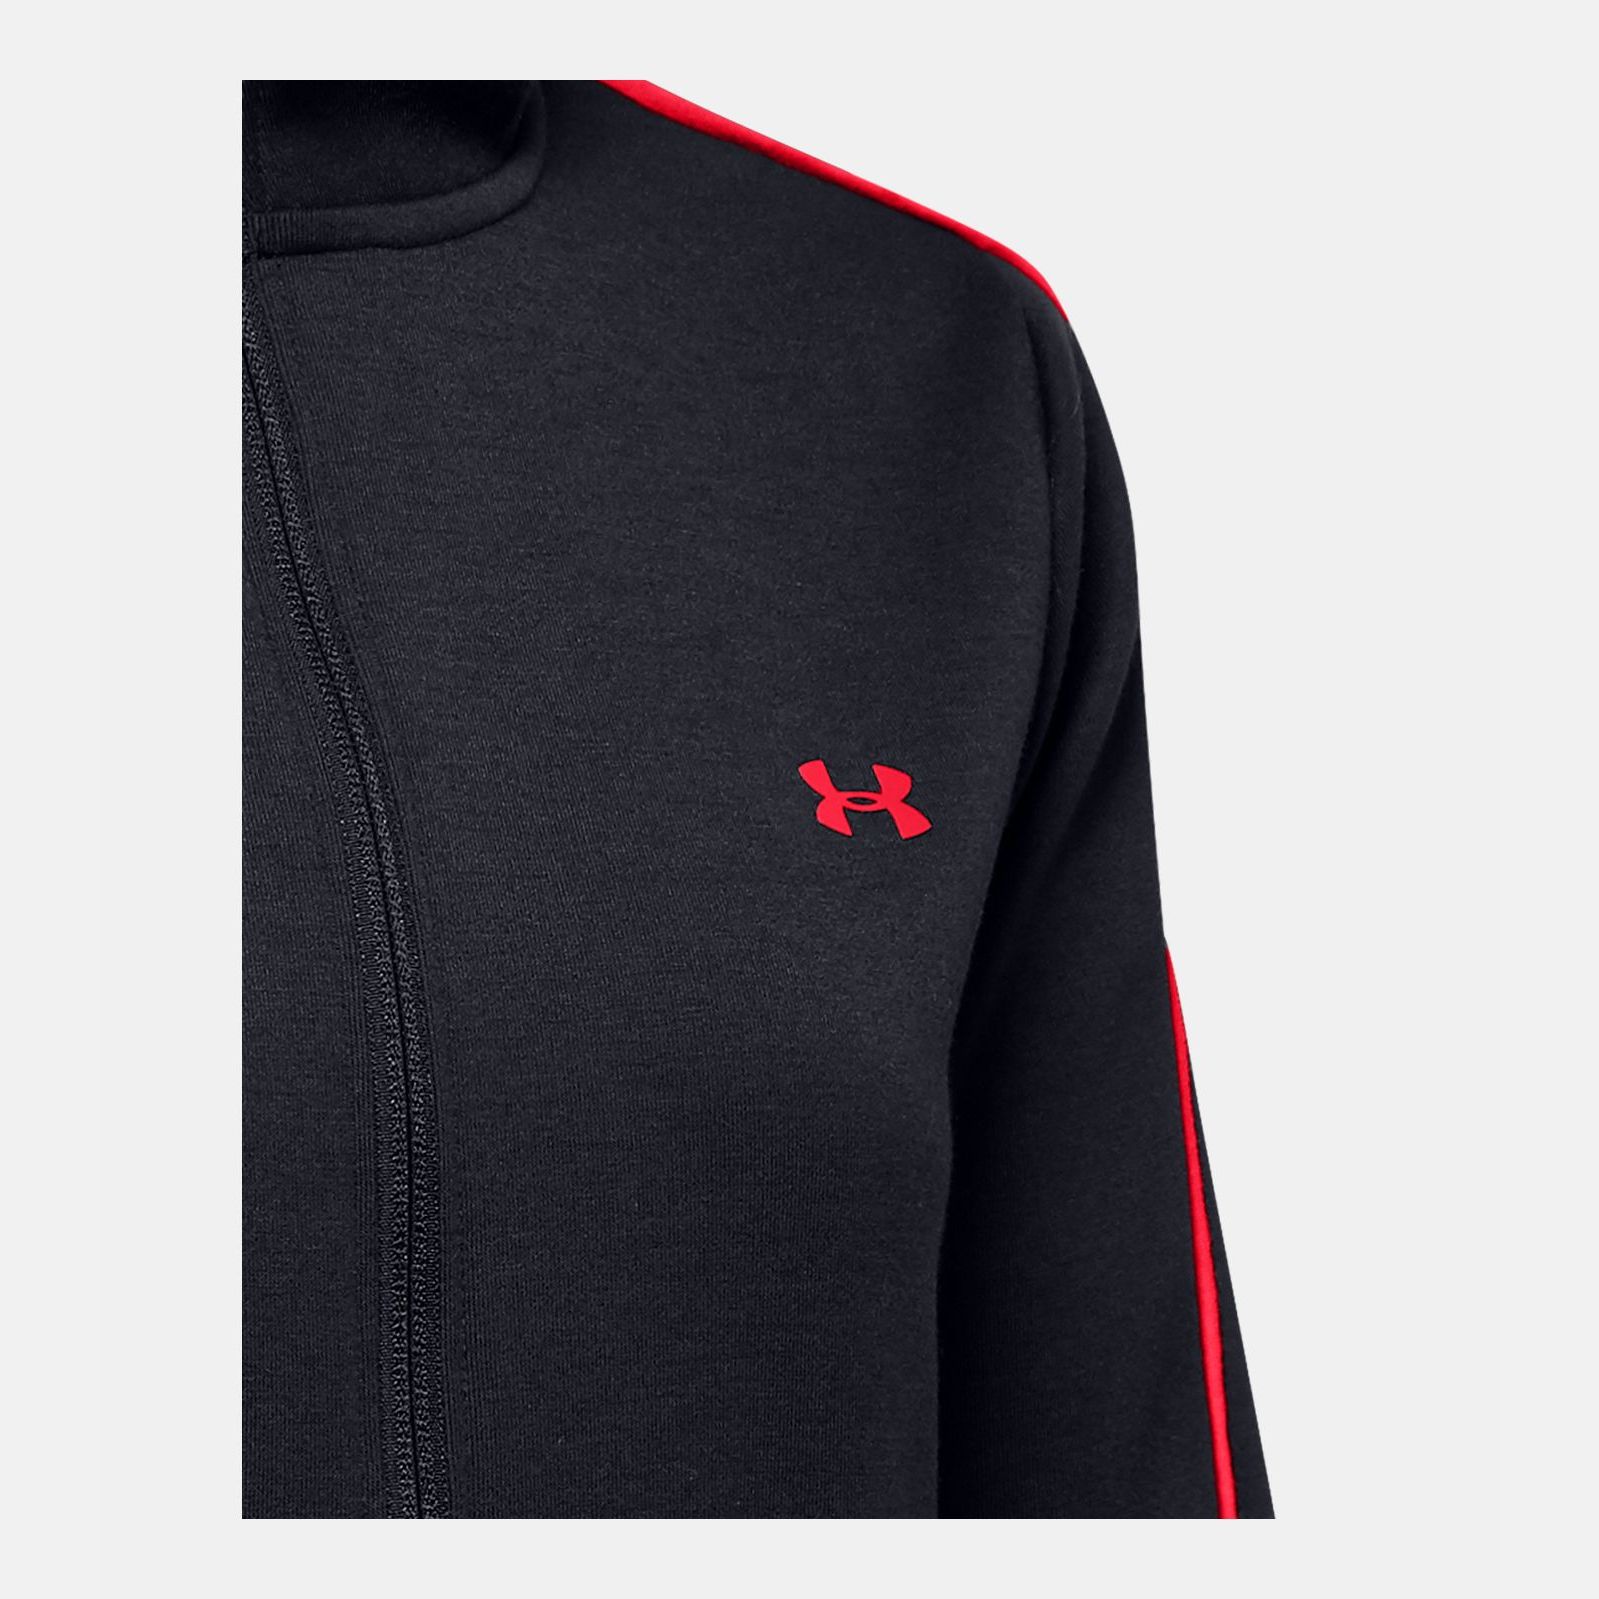 Bluze -  under armour Double Knit Full Zip 1795